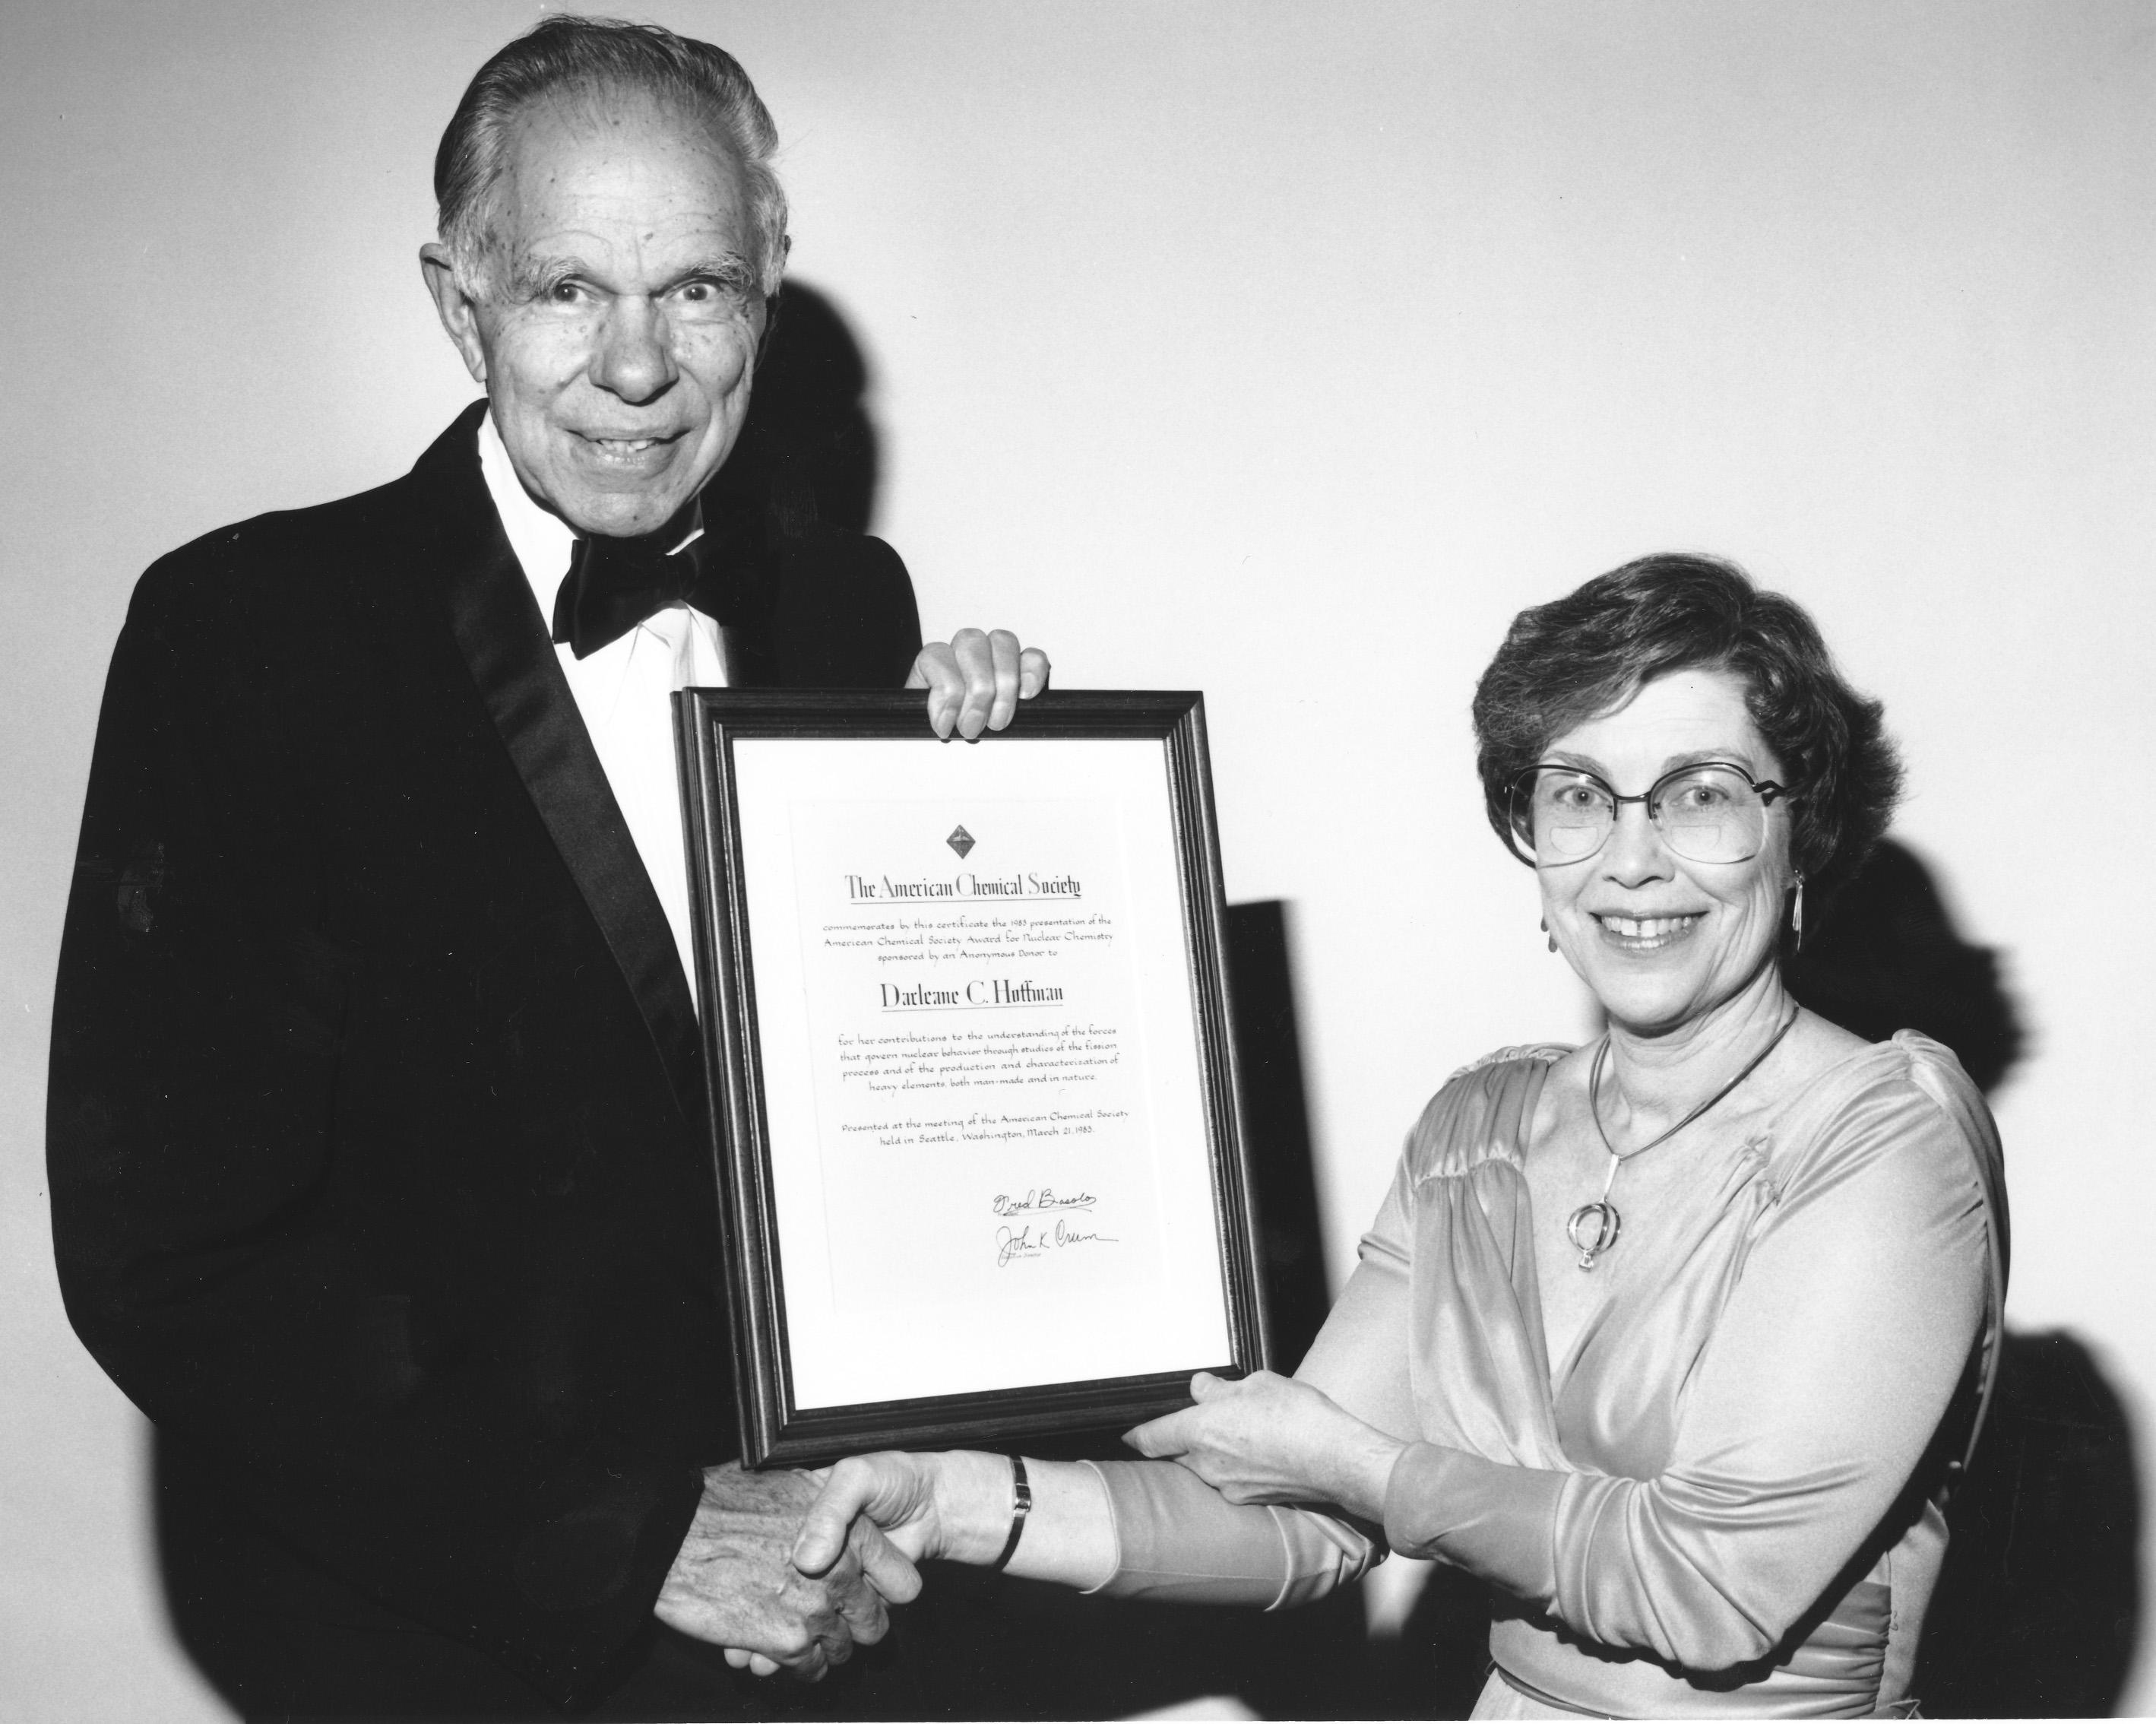 American Chemical Society Award for Nuclear Chemistry Presented by Dr. Glenn T. Seaborg to Dr. Darleane C. Hoffman